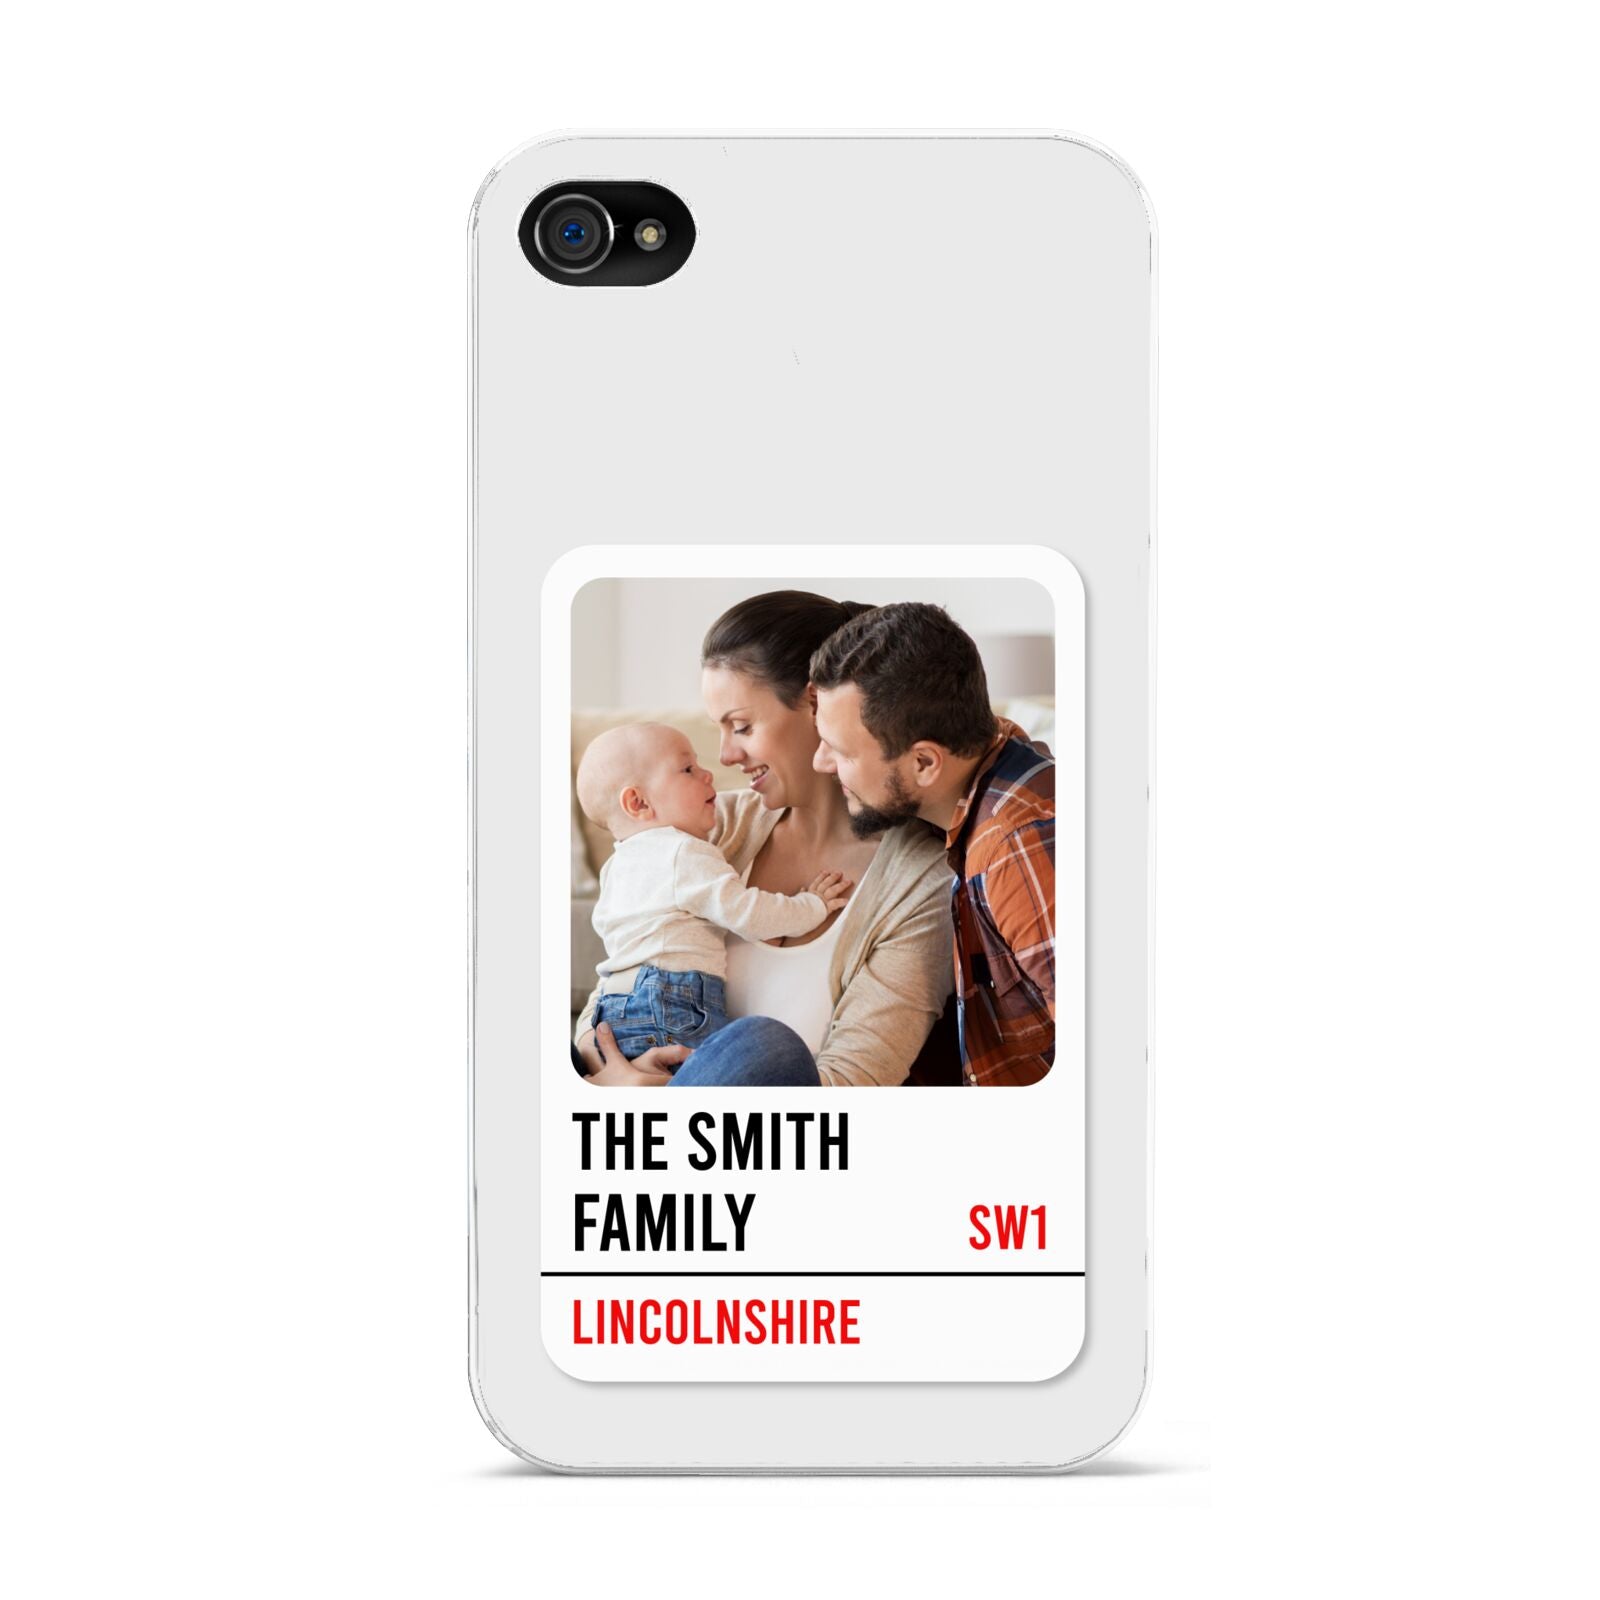 Street Sign Family Photo Upload Apple iPhone 4s Case